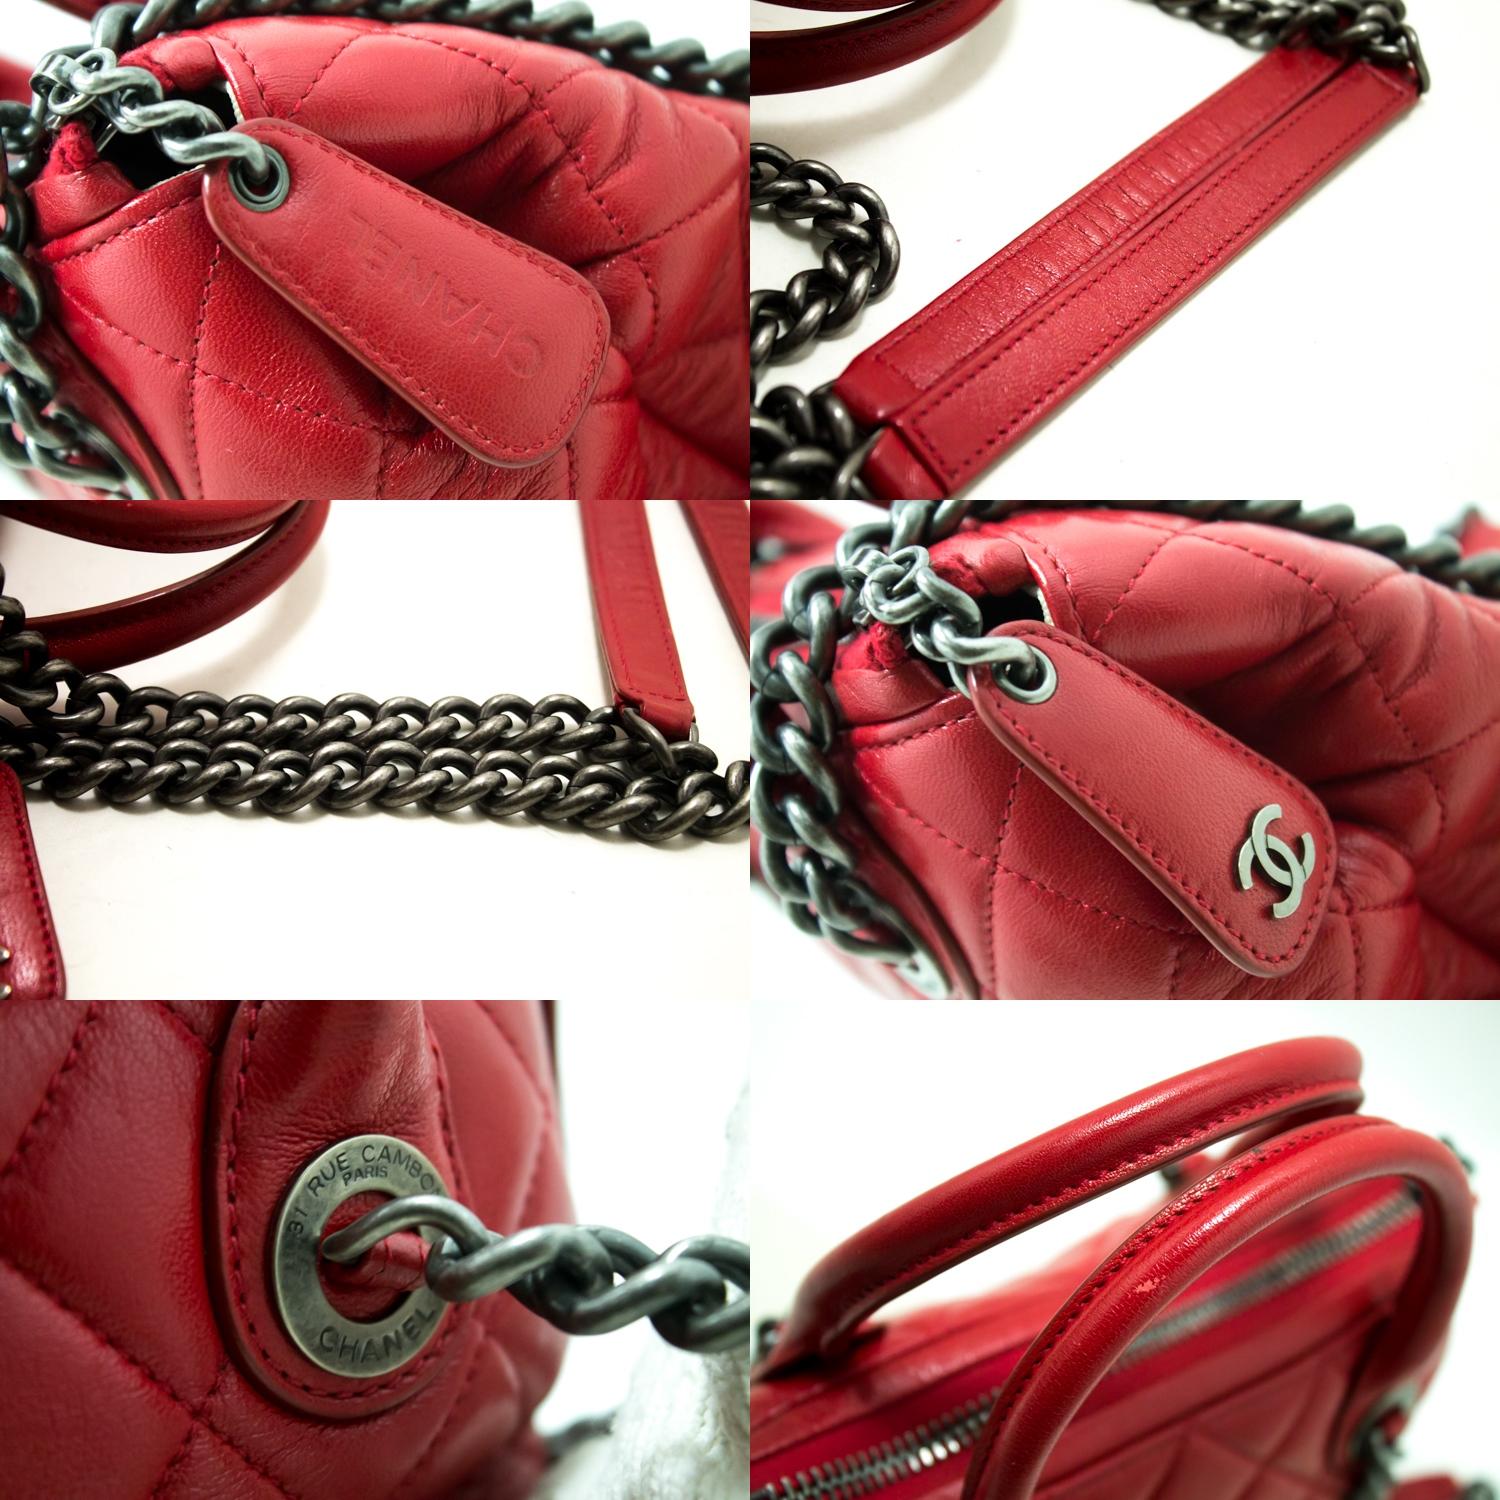 Women's CHANEL 2 Way Red Silver Chain Shoulder Bag Handbag Quilted Calf